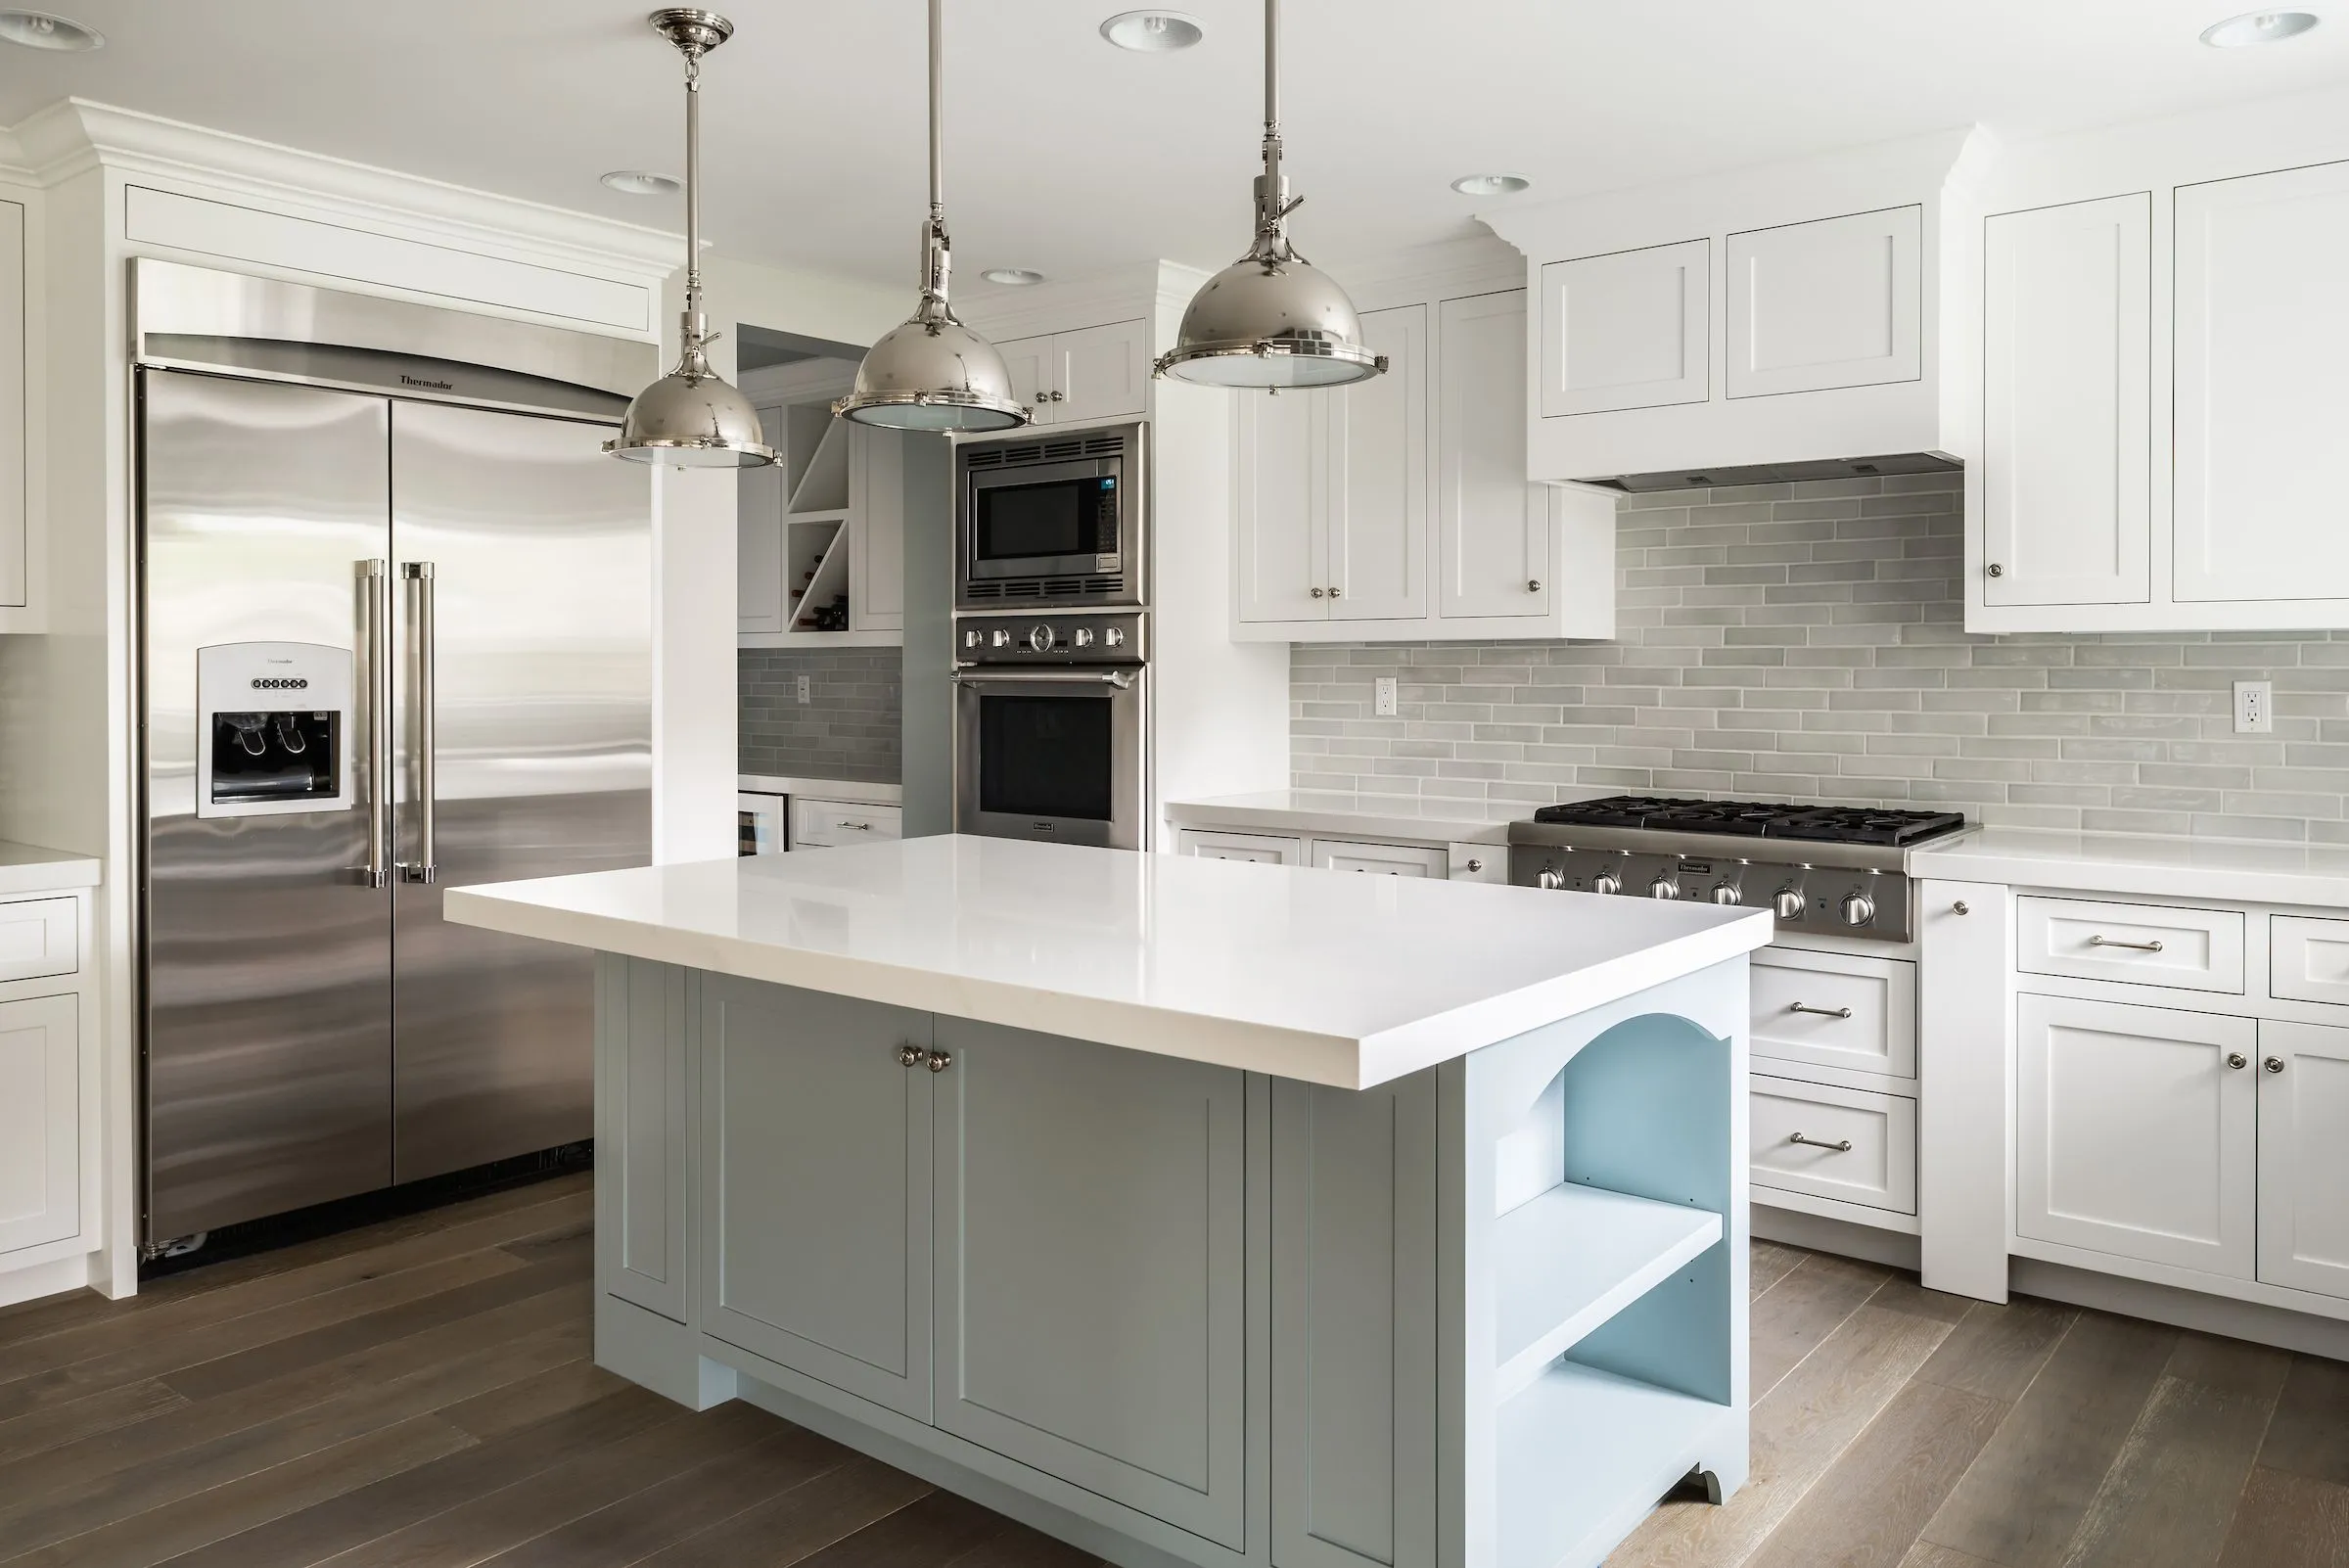 Kitchen Design Inspiration - Gray Floors and White Cabinets